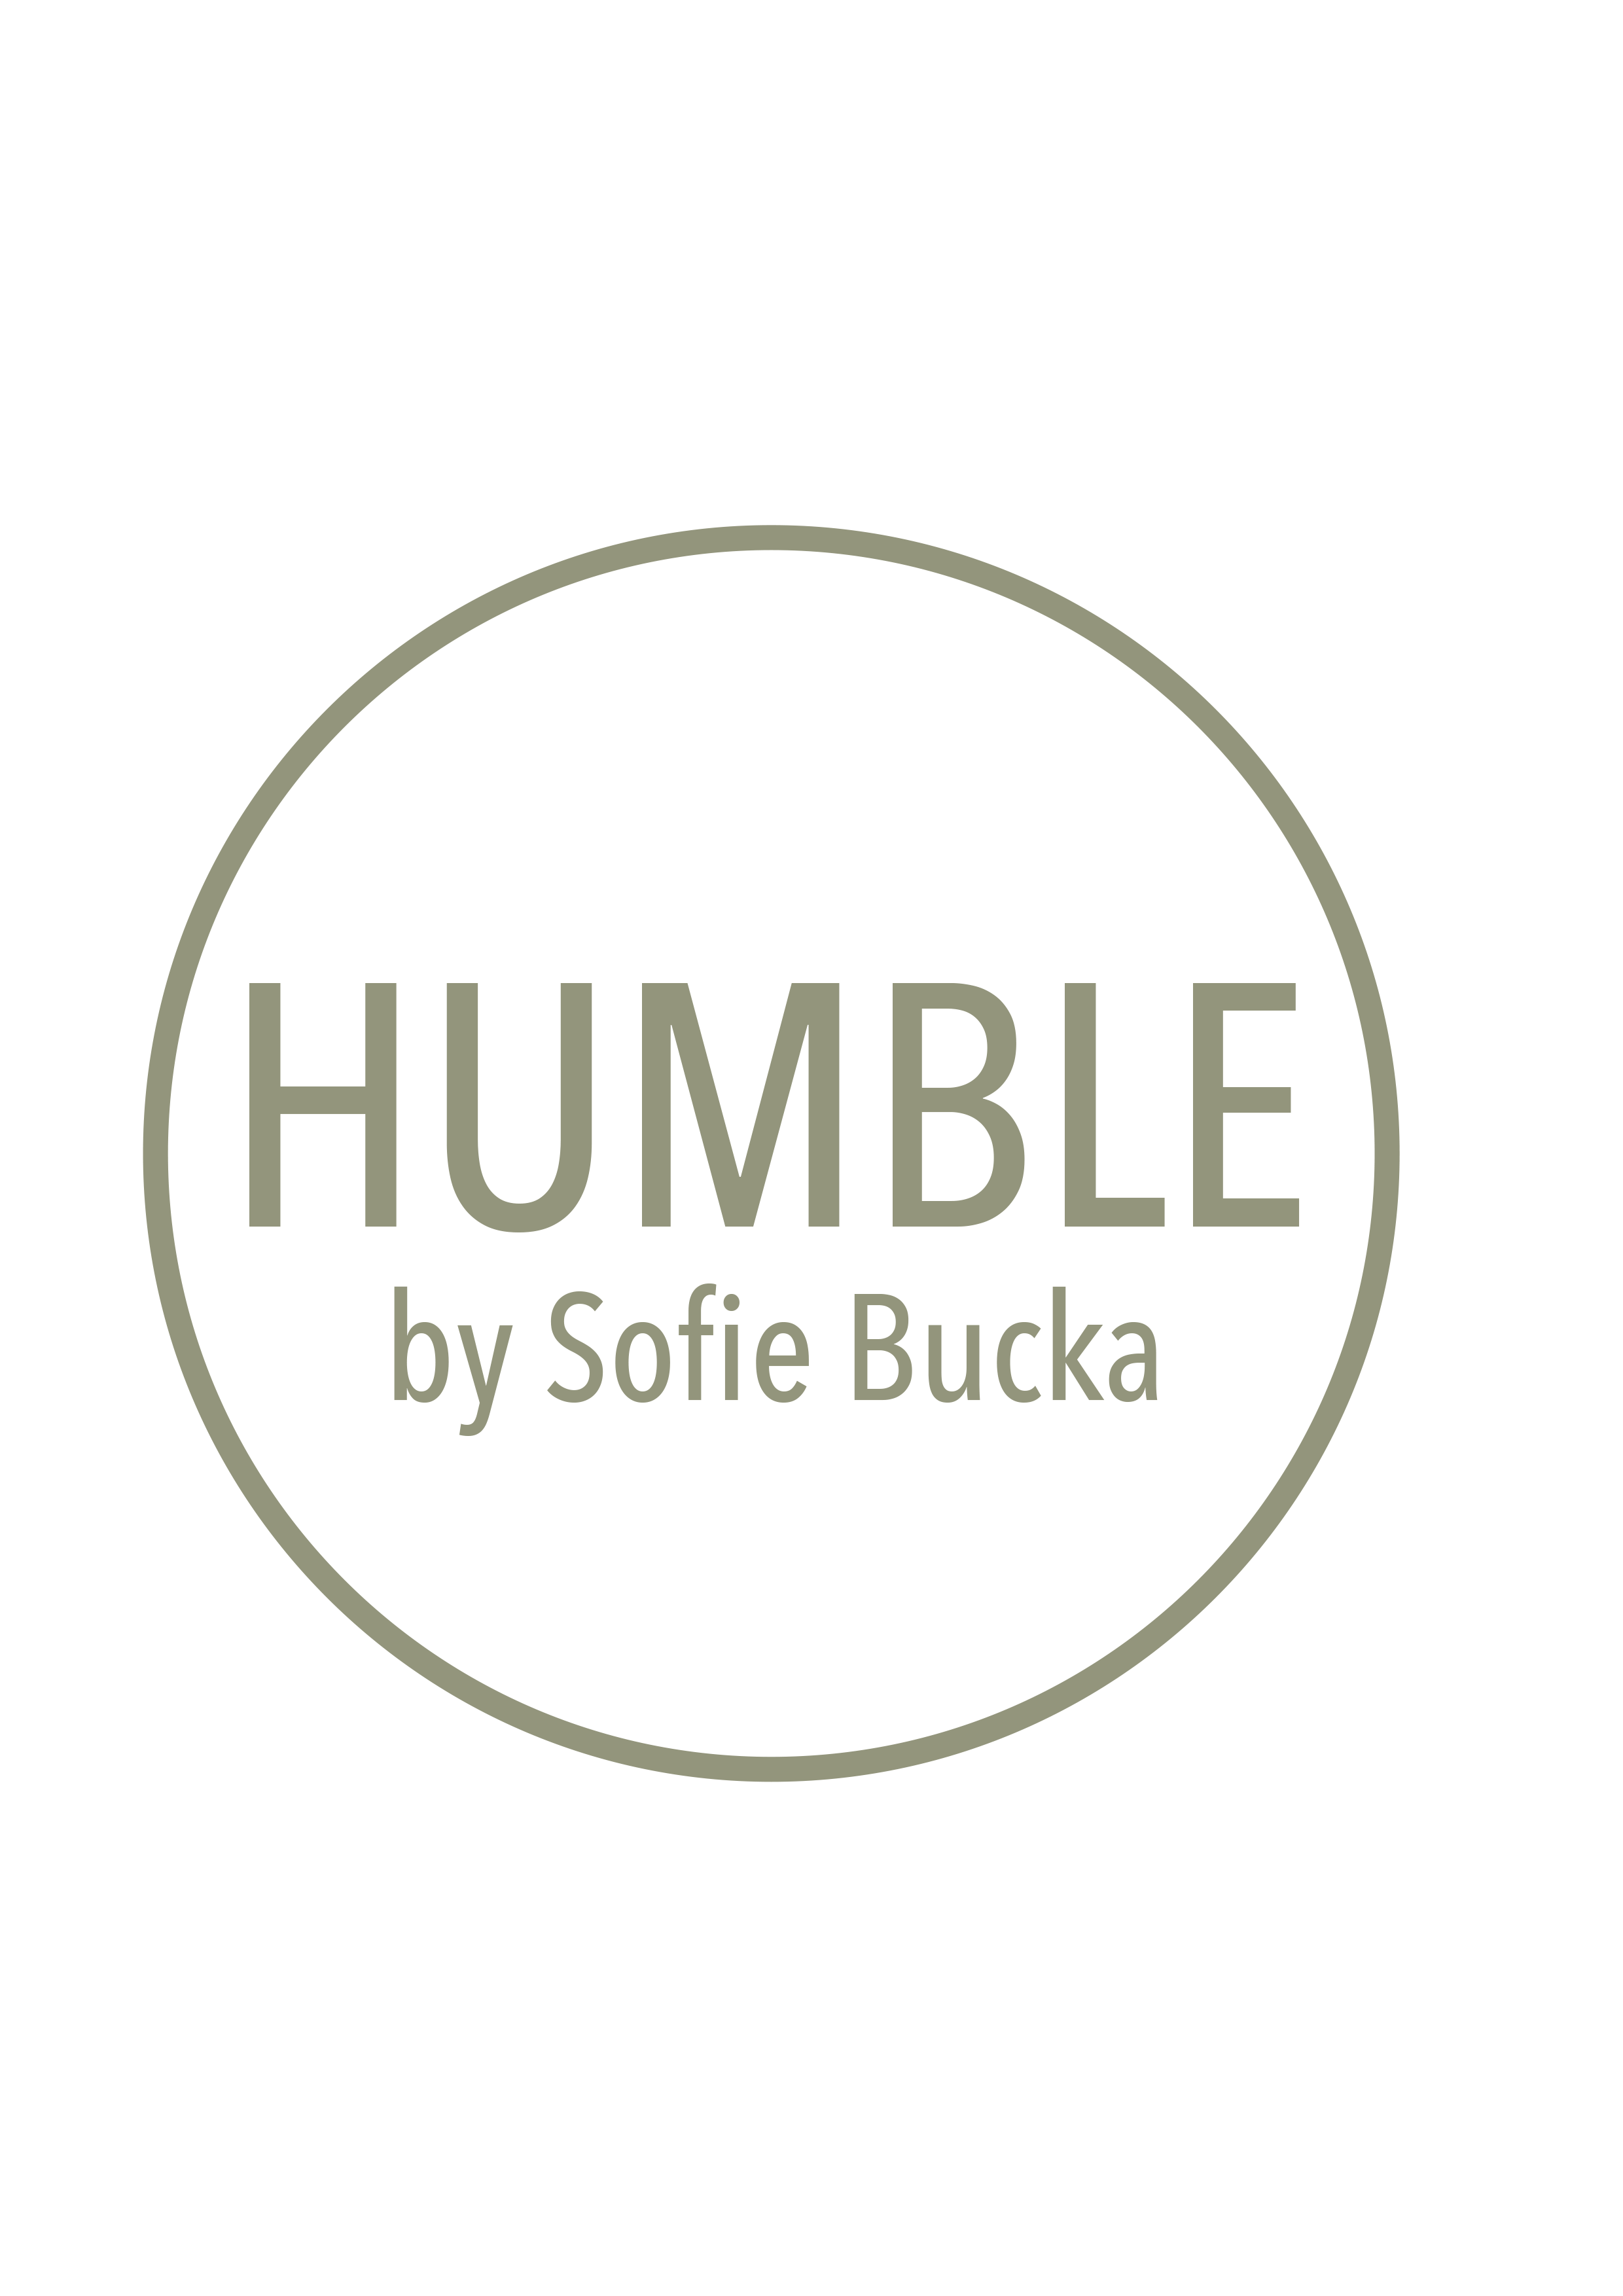 HUMBLE by Sofie